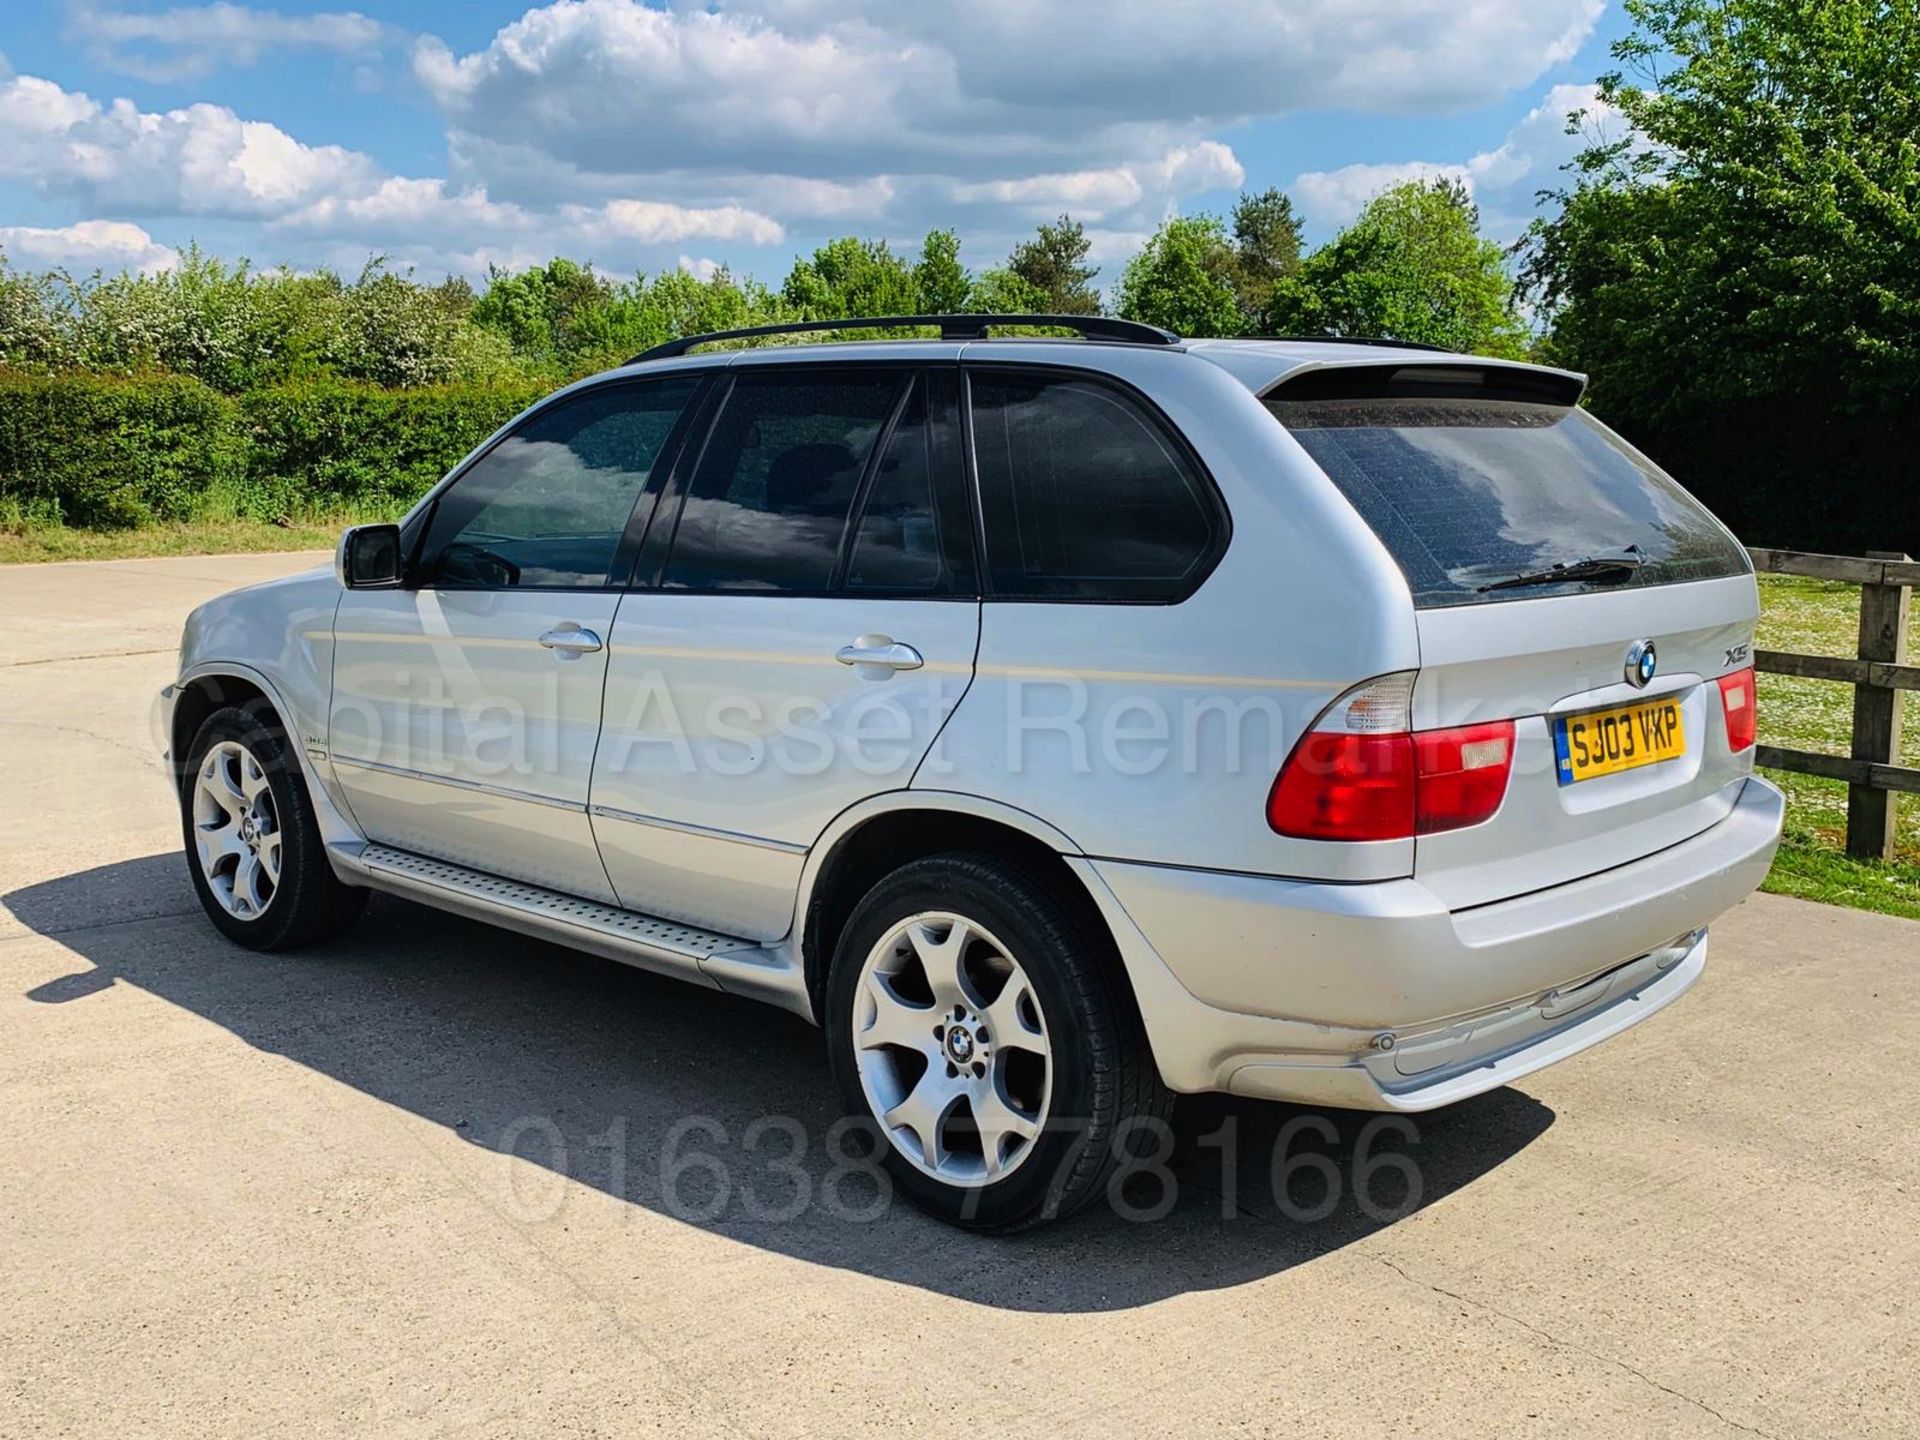 (On Sale) BMW X5 *SPORT EDITION* SUV (2003) '3.0 DIESEL -184 BHP- AUTO' *LEATHER - AIR CON* (NO VAT) - Image 5 of 38